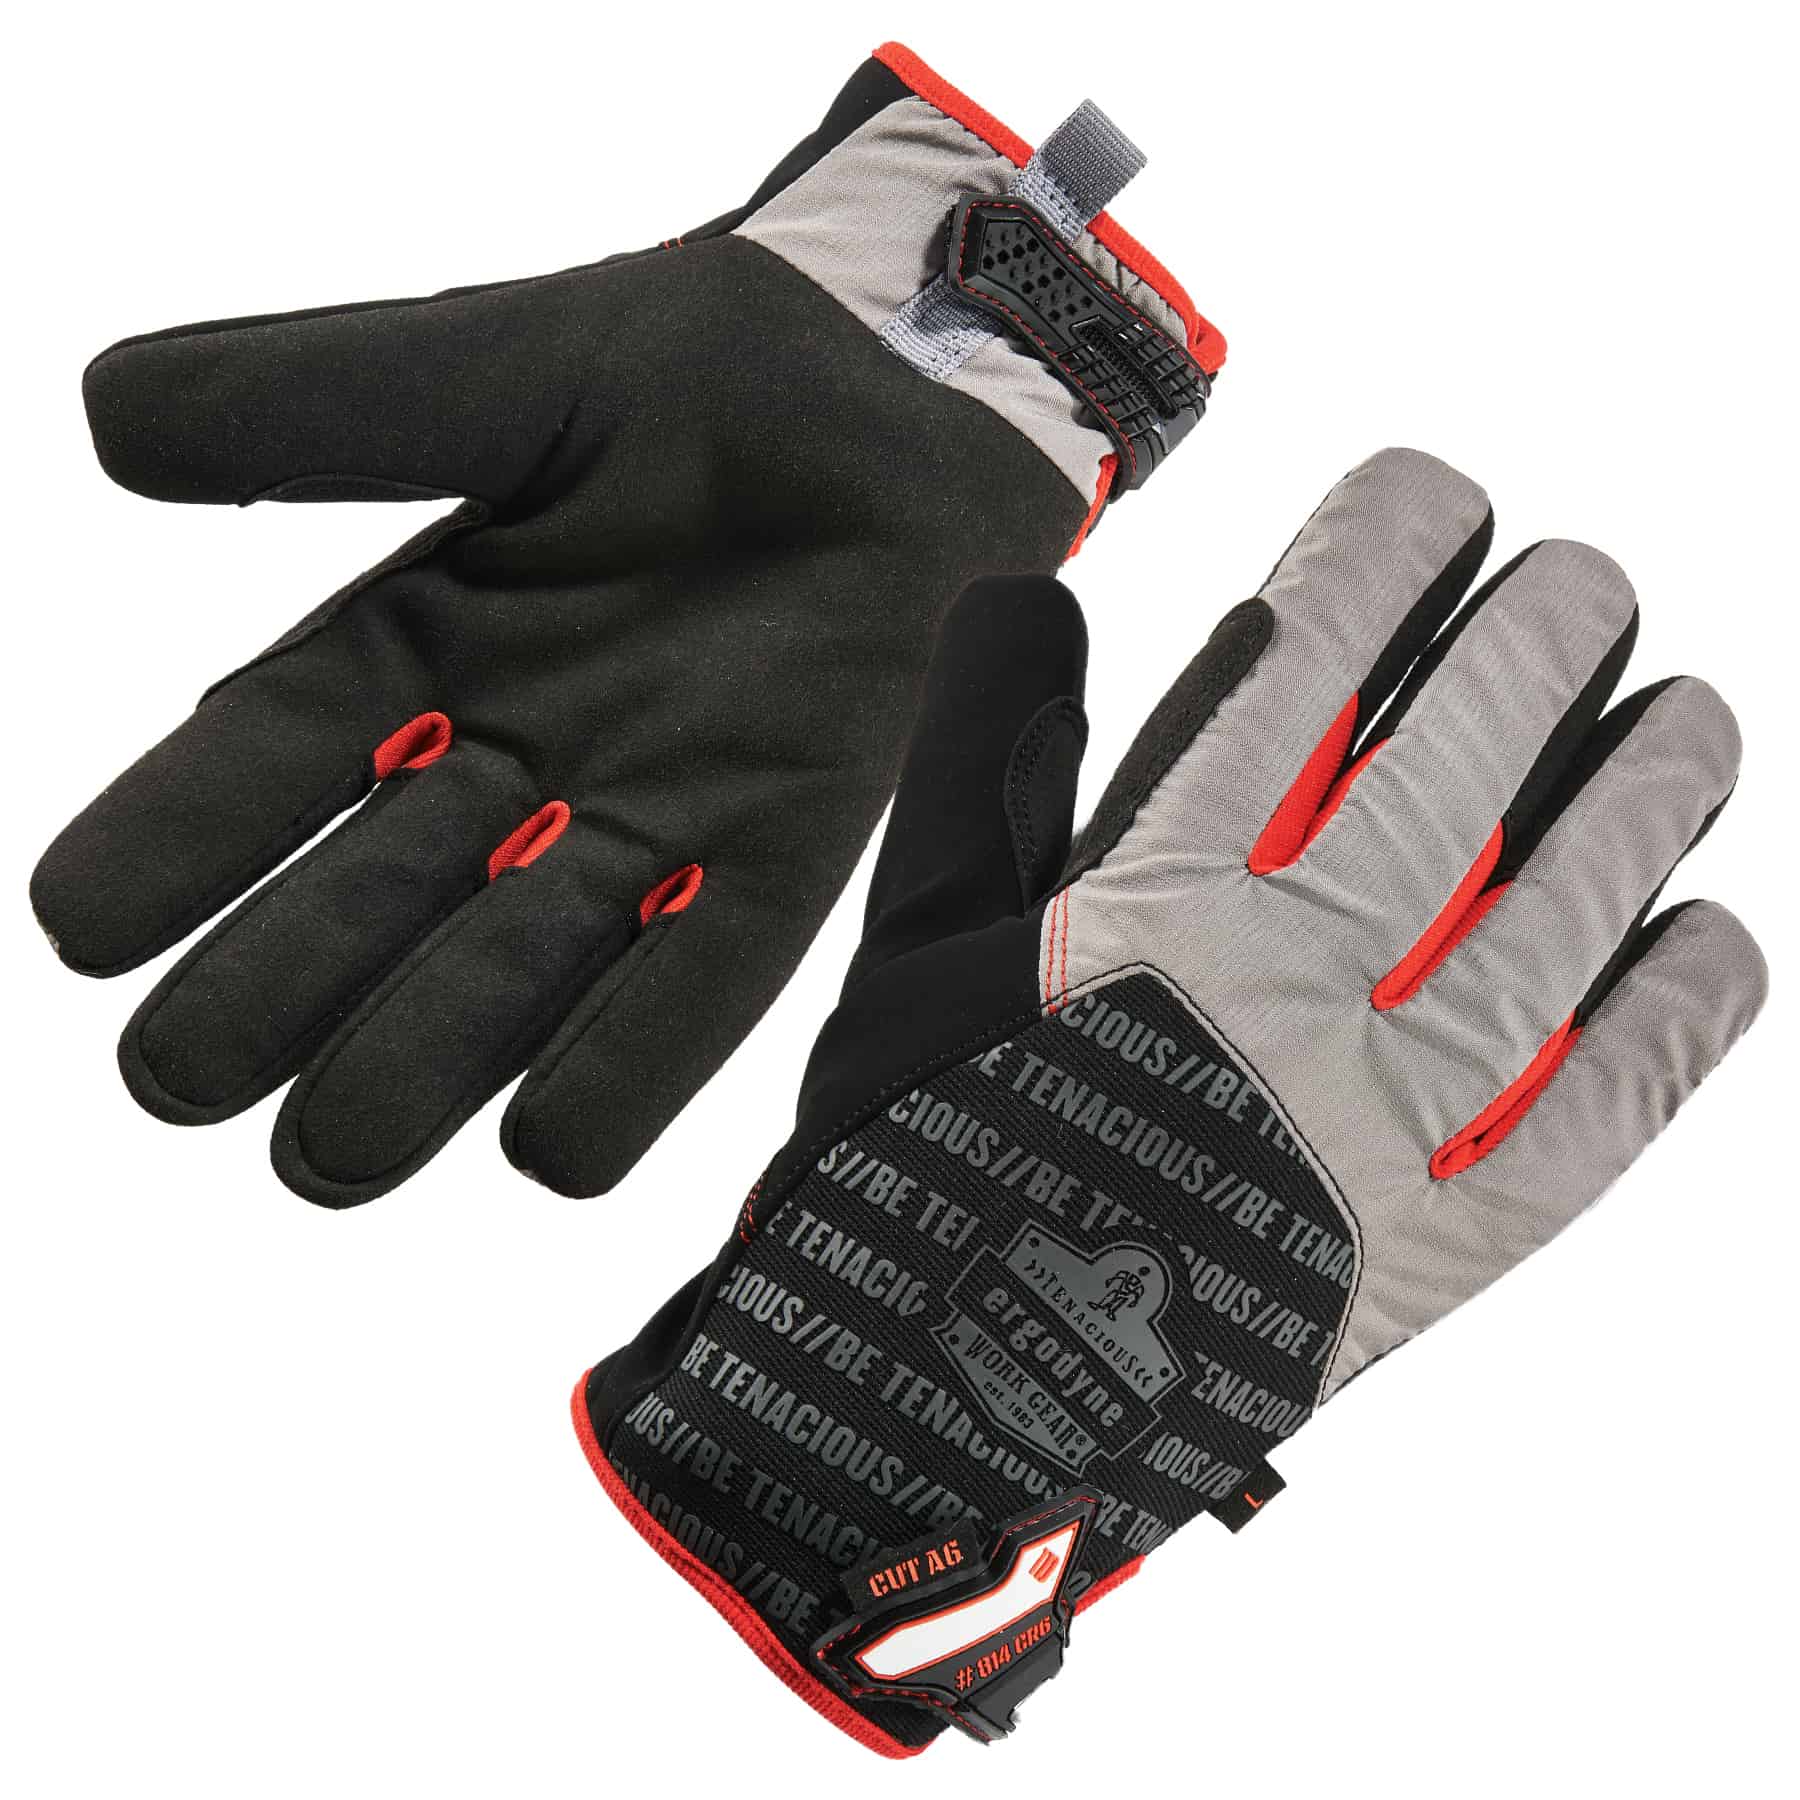 https://www.ergodyne.com/sites/default/files/product-images/17212-814cr6-thermal-utility-cut-resistance-gloves-paired.jpg